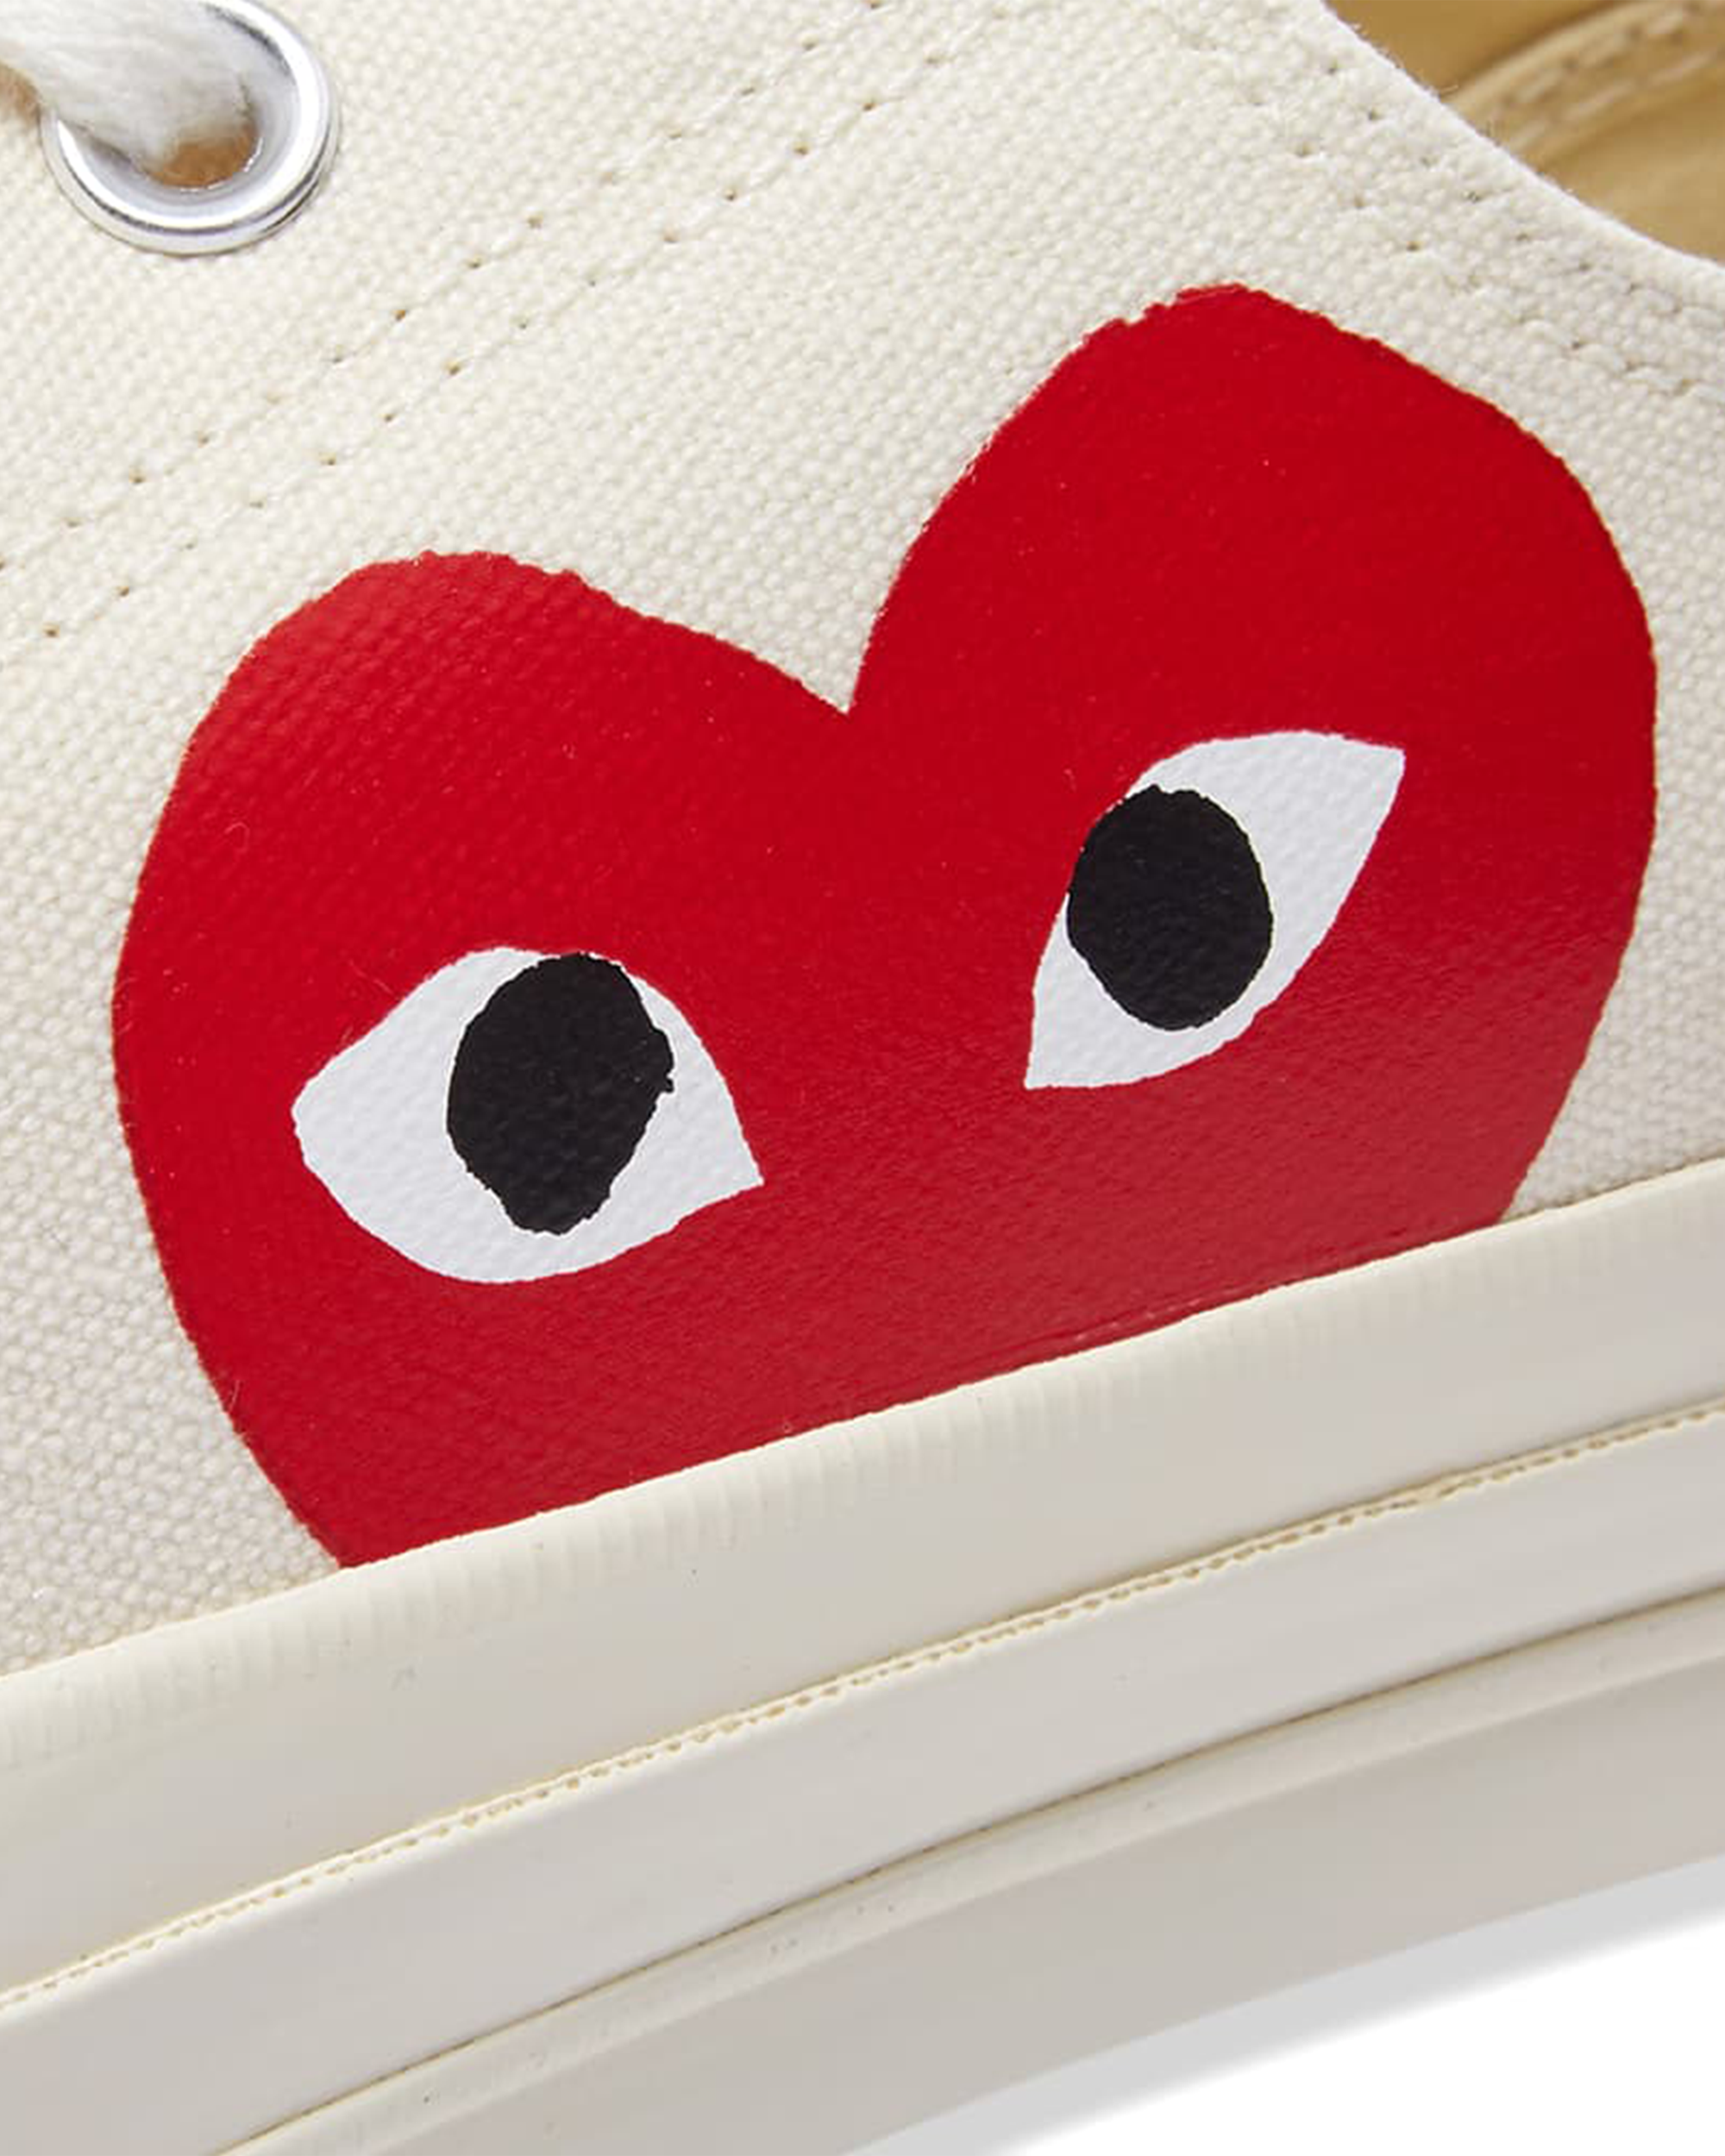 Converse CT70 Low Big Heart - Milk / Red